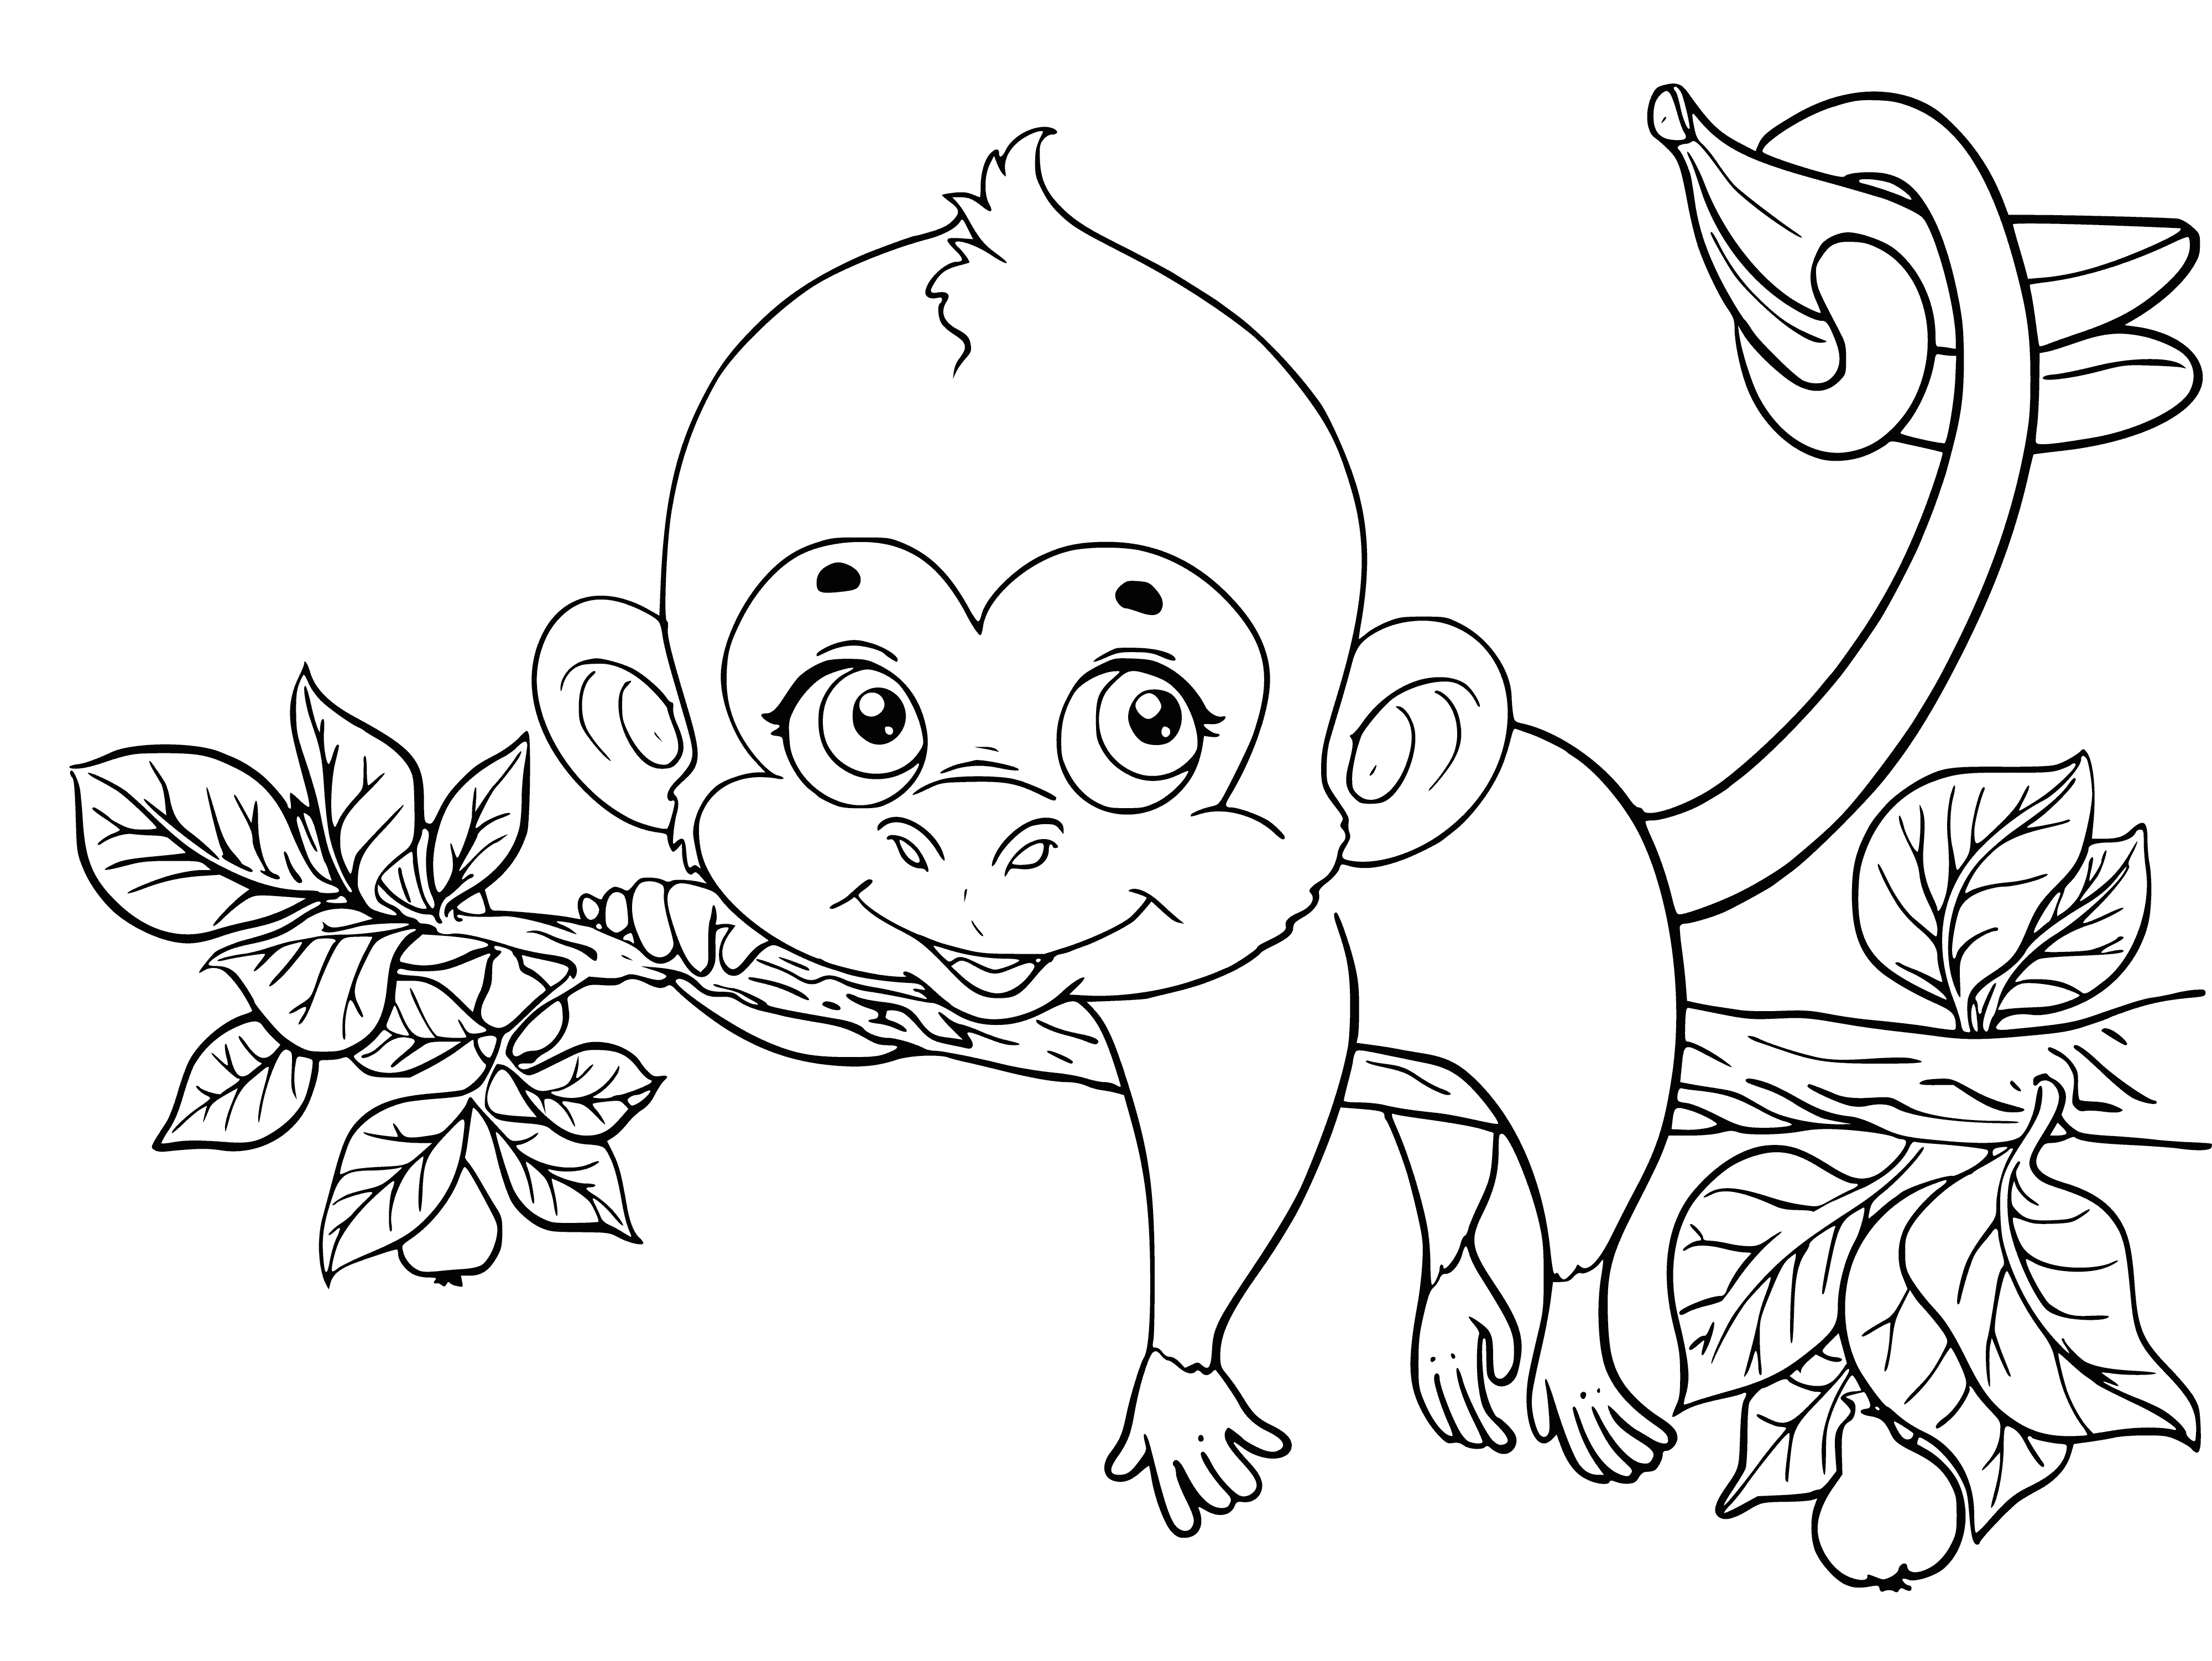 coloring page: Monkey sits on branch: brown body, white face, black eyes, open mouth, long limbs, looking left.